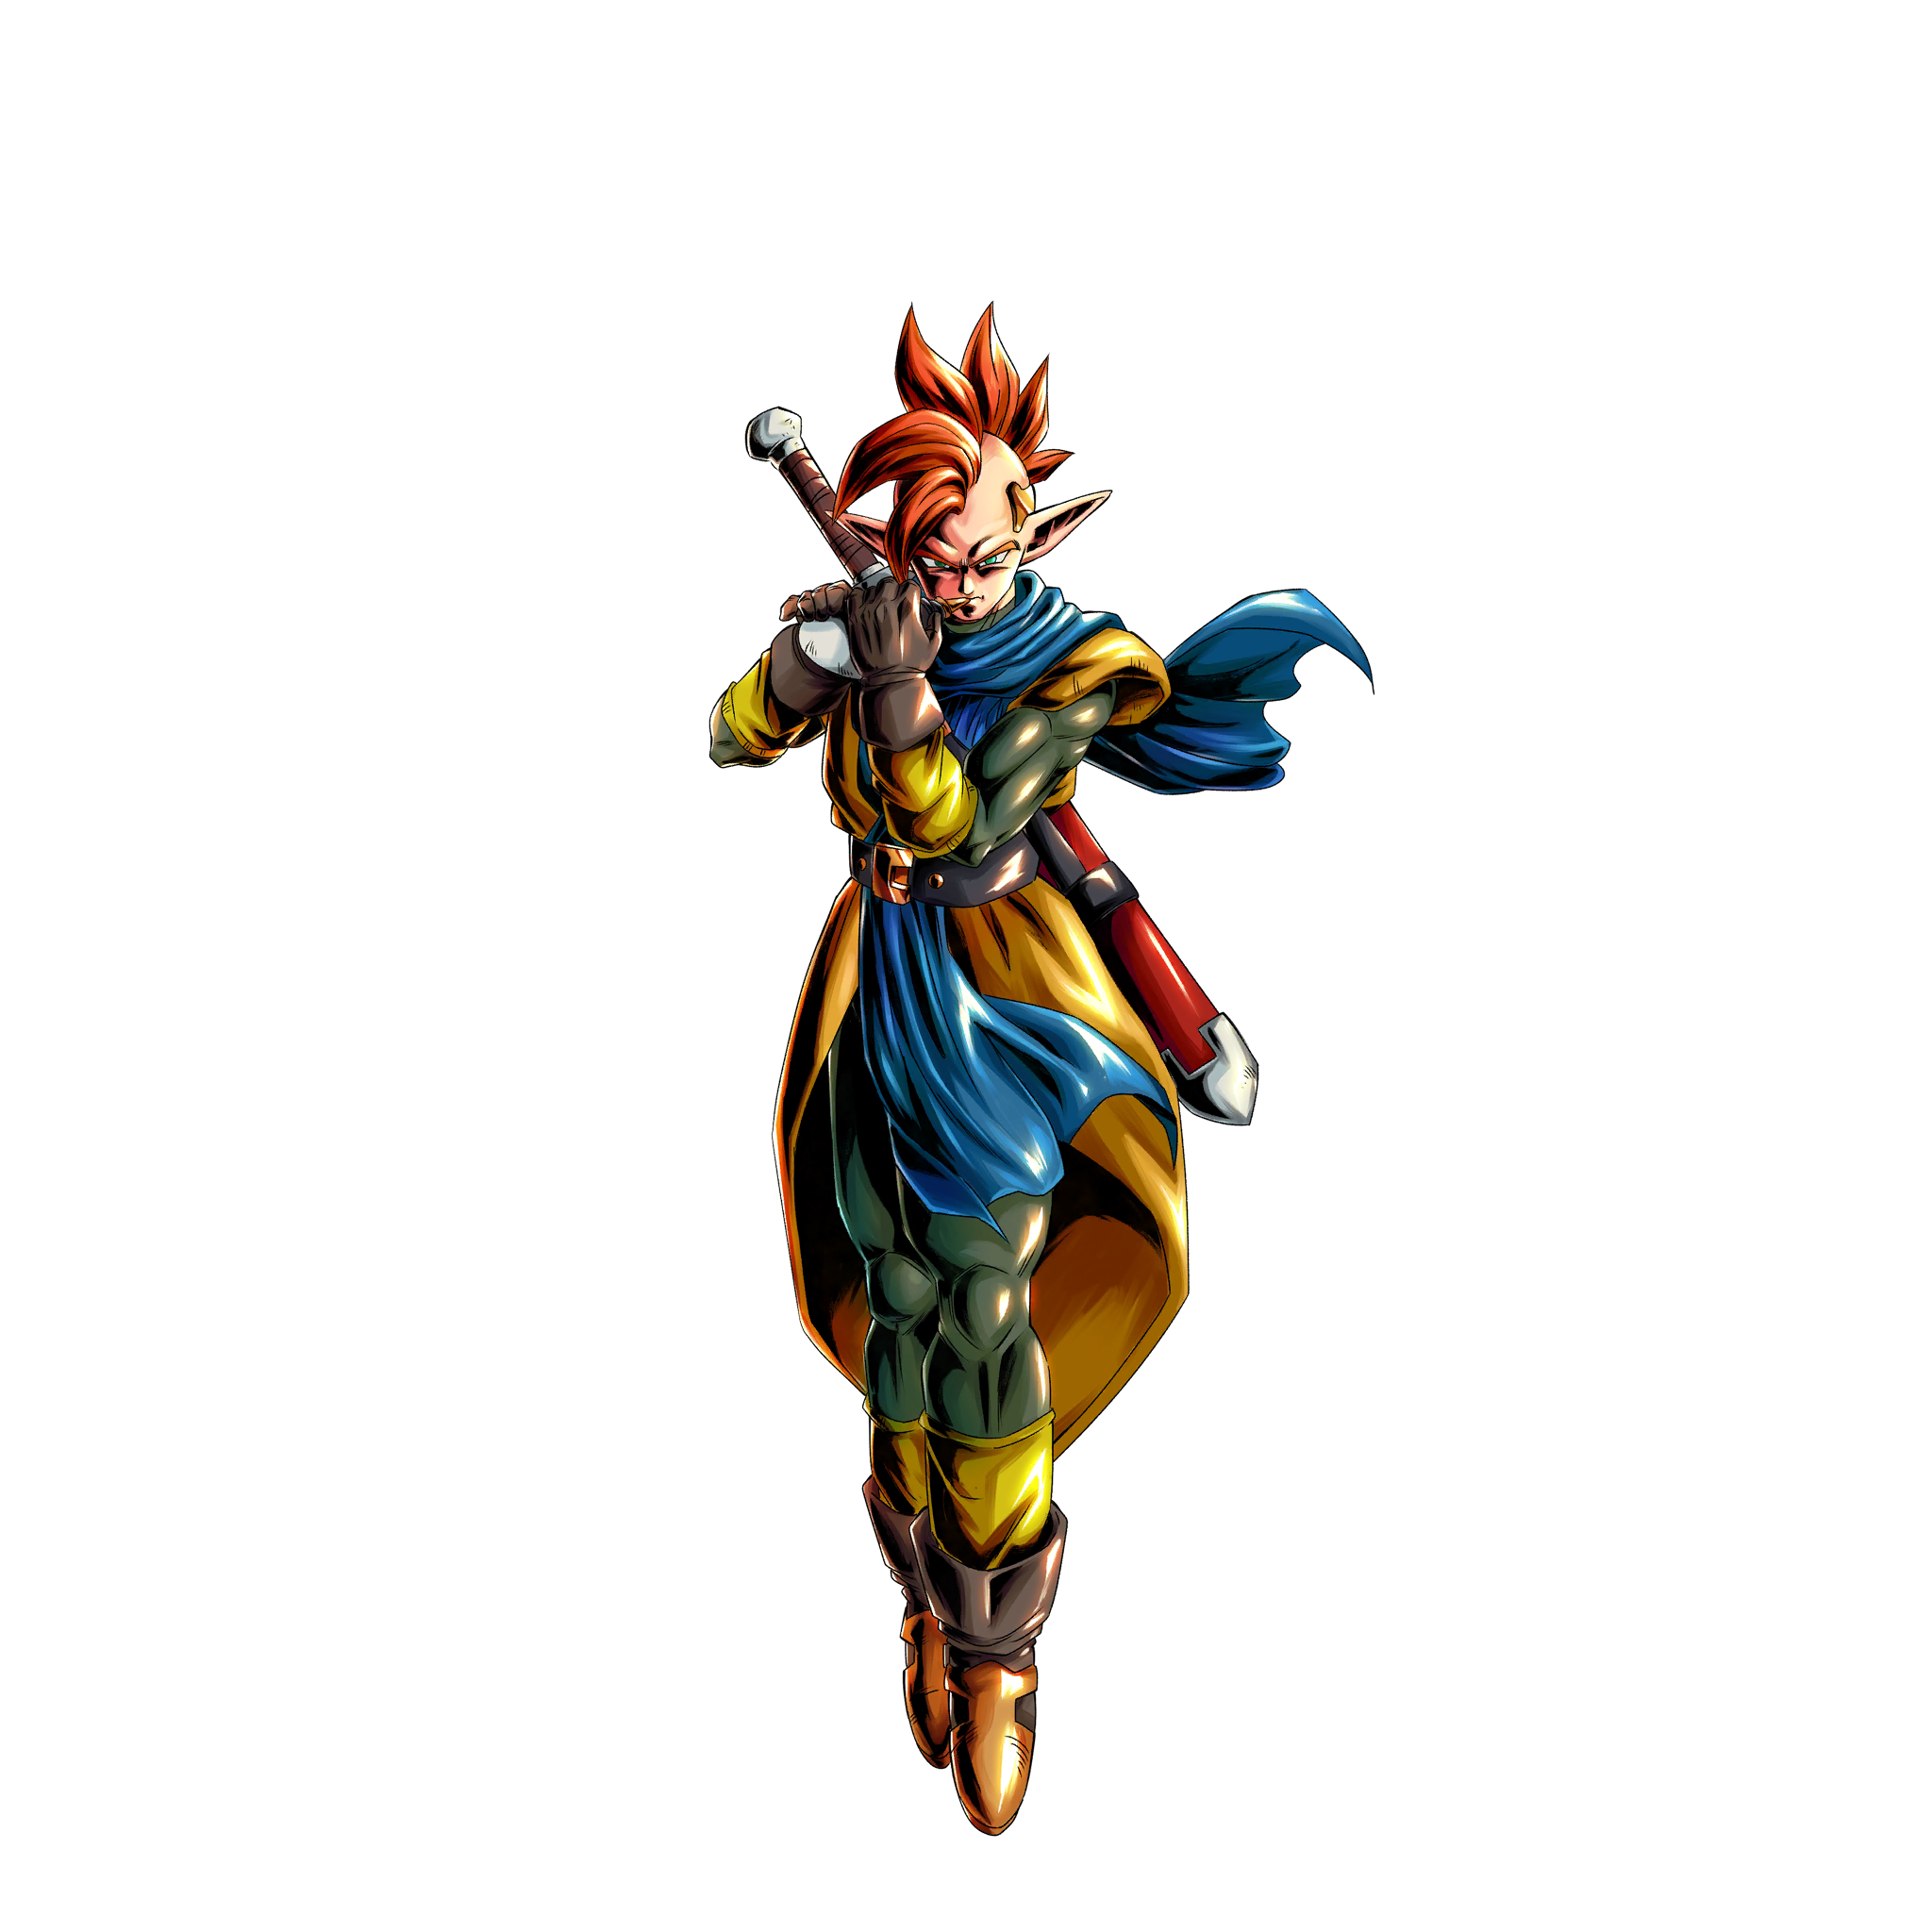 New Hero Tapion is the Best Support Unit in the Game - Dragon Ball